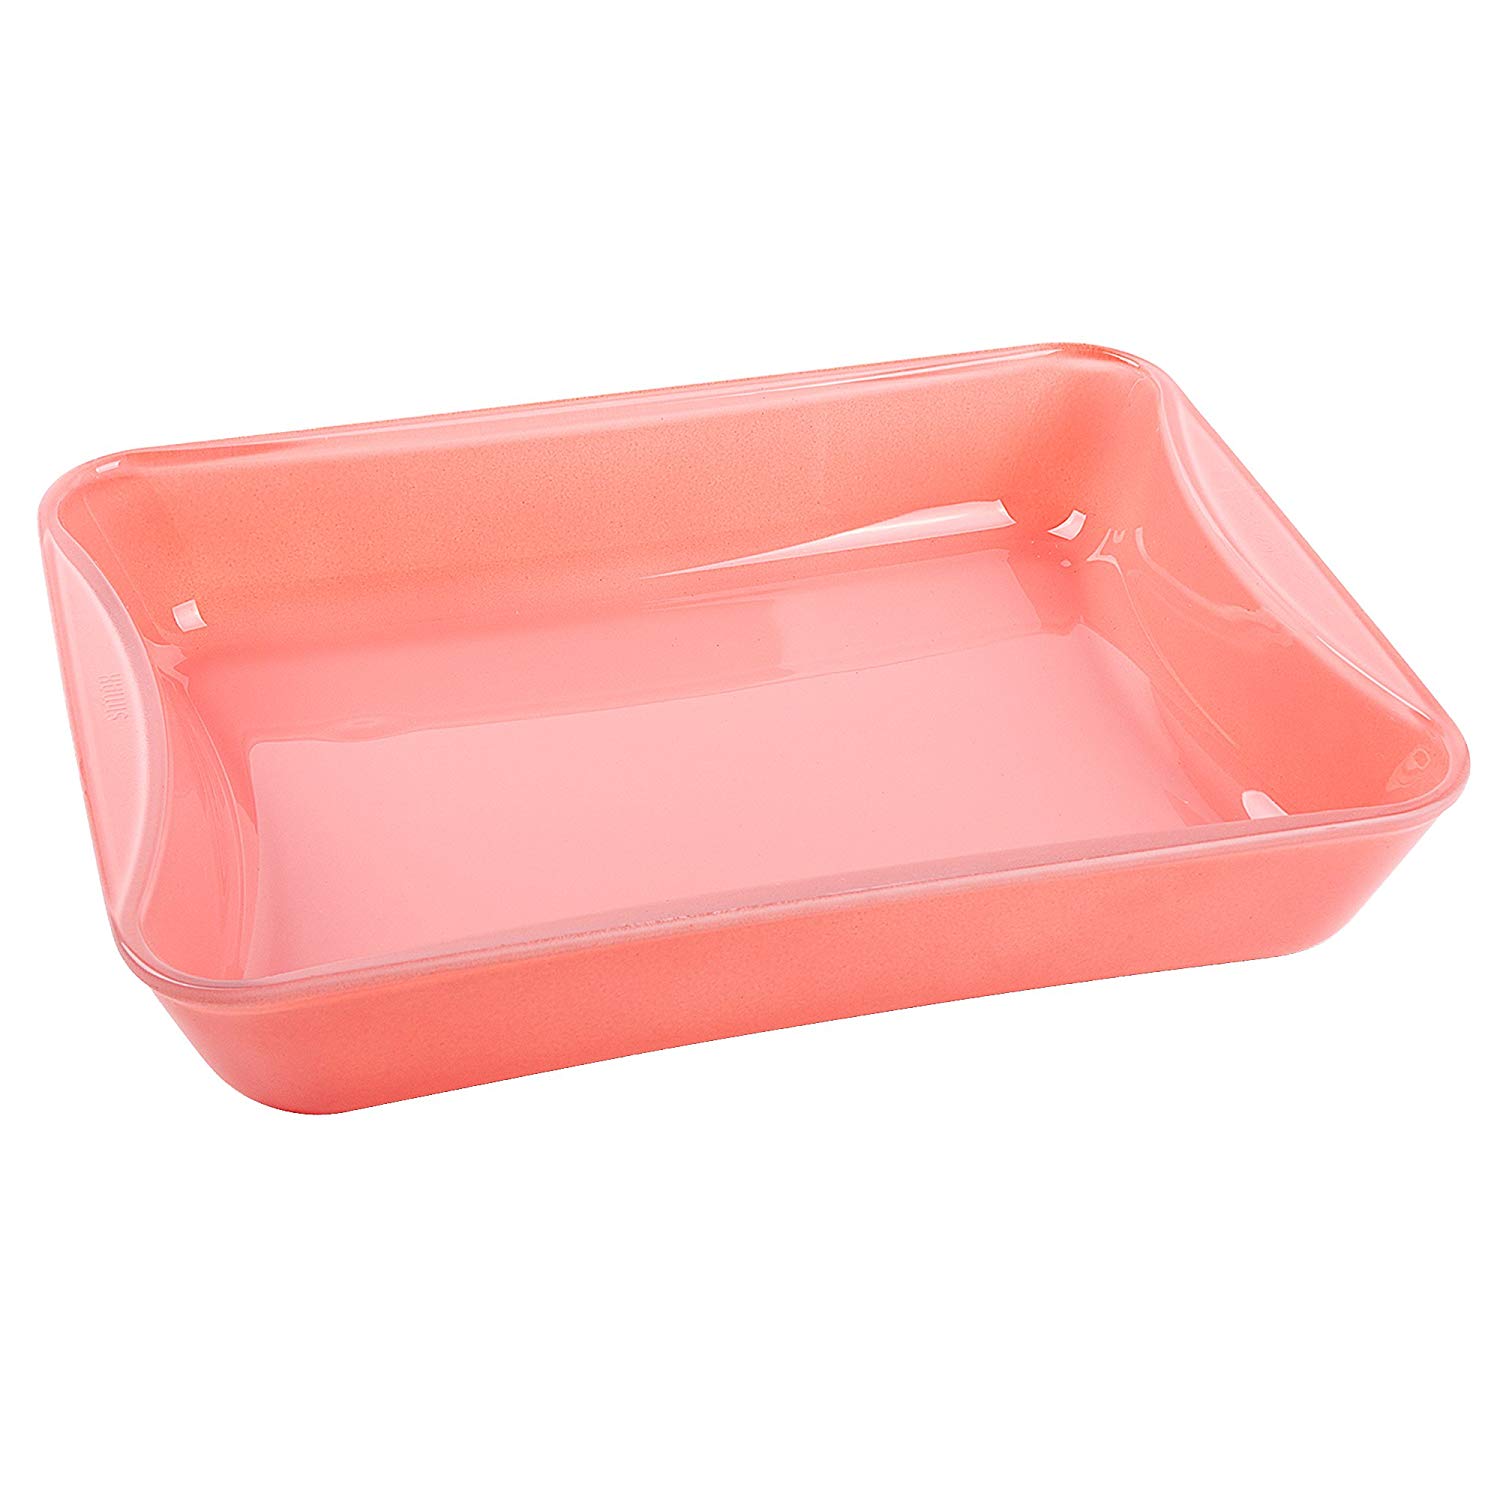 Bohemia Cristal 093 012 309 Play Of Colors Cooking Frying And Baking Dish R